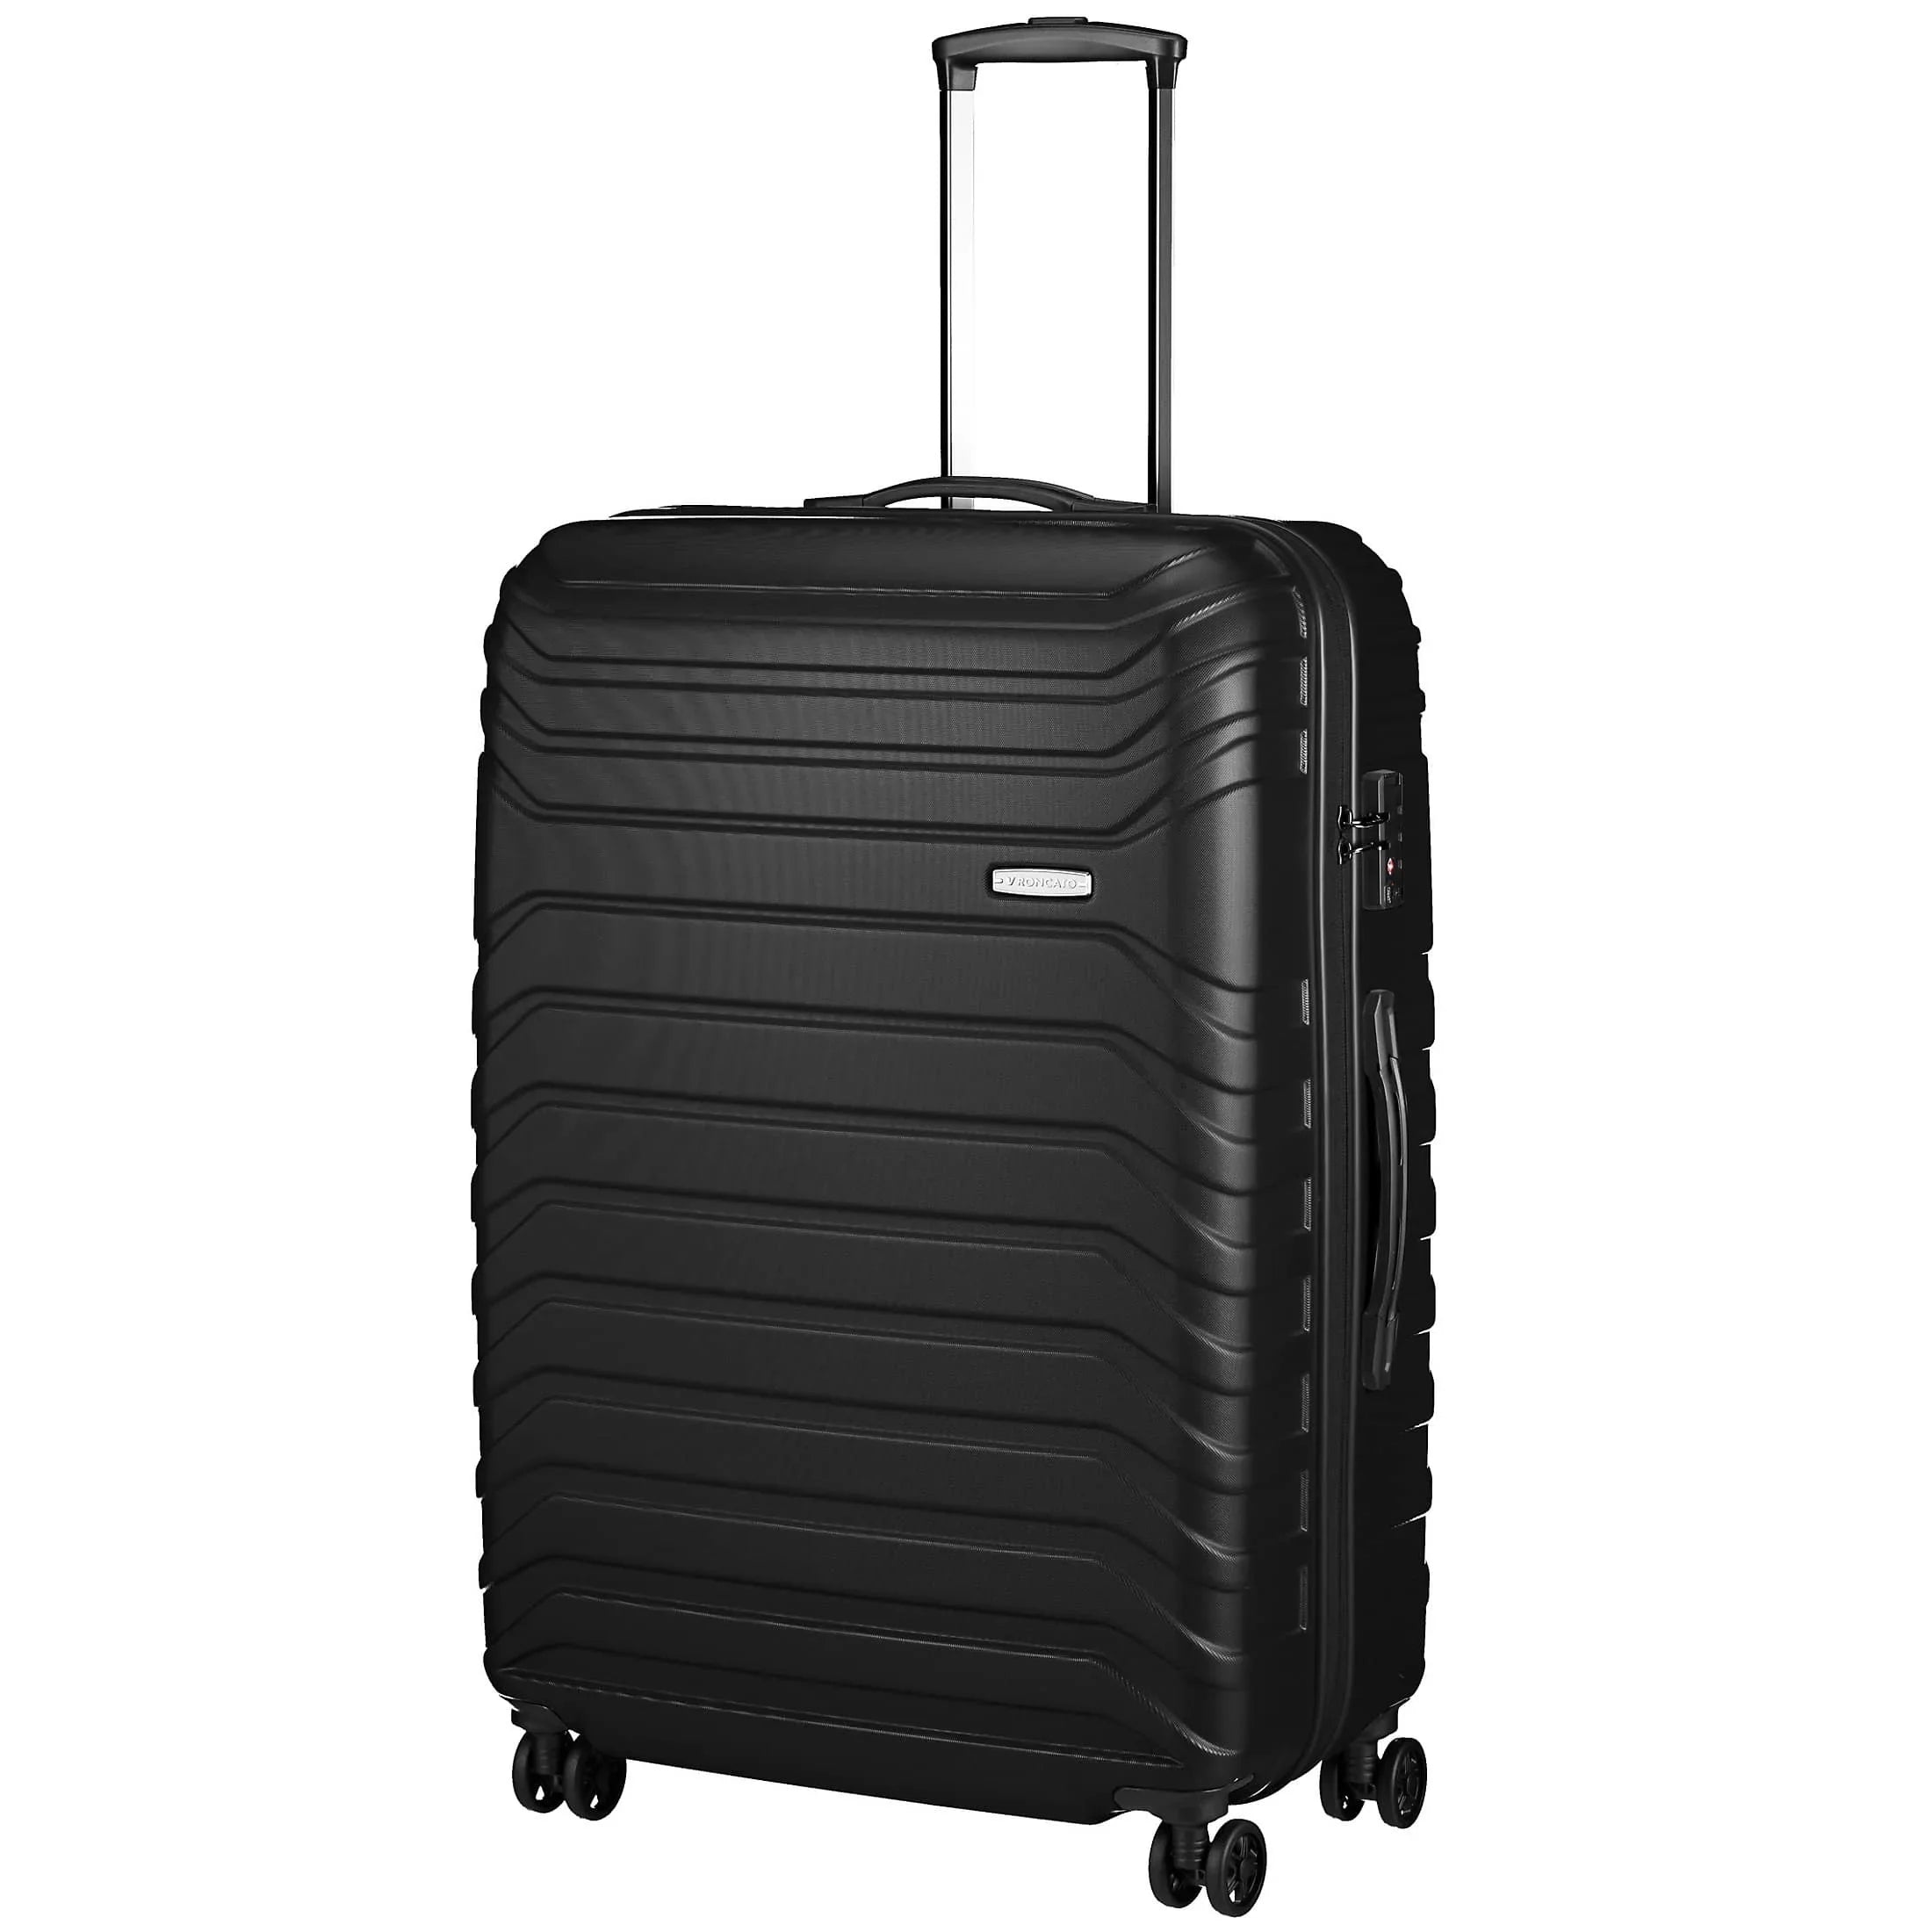 Roncato - modern luggage for business and vacation from Italy! – Page 2